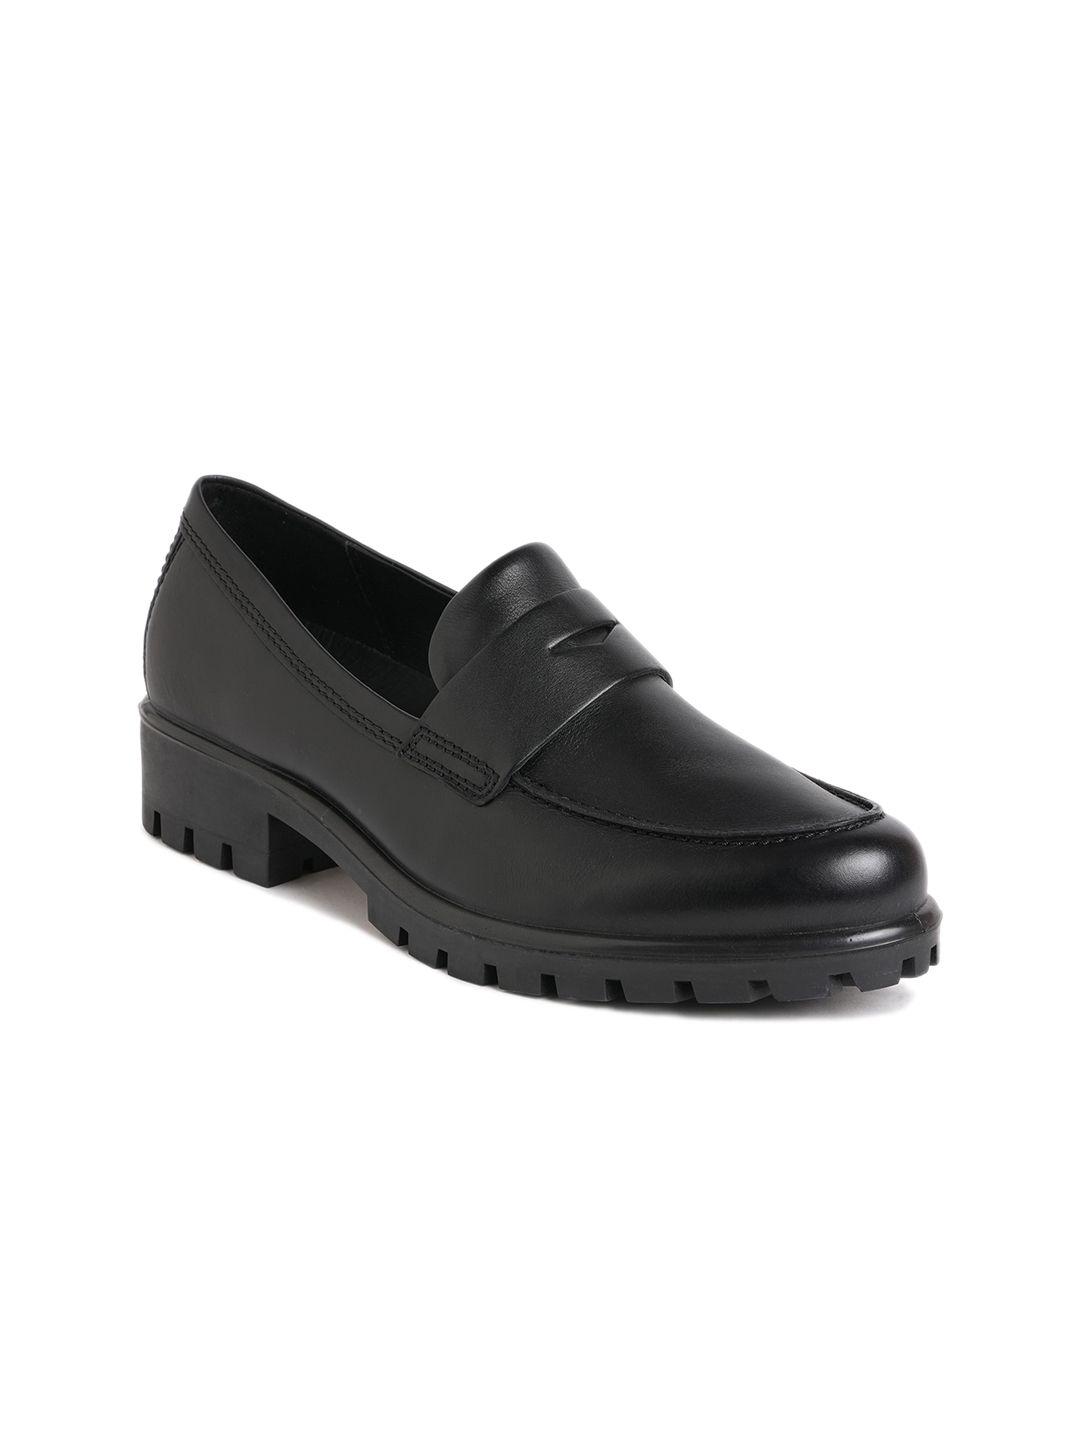 ecco women modtray comfort insole leather penny loafers